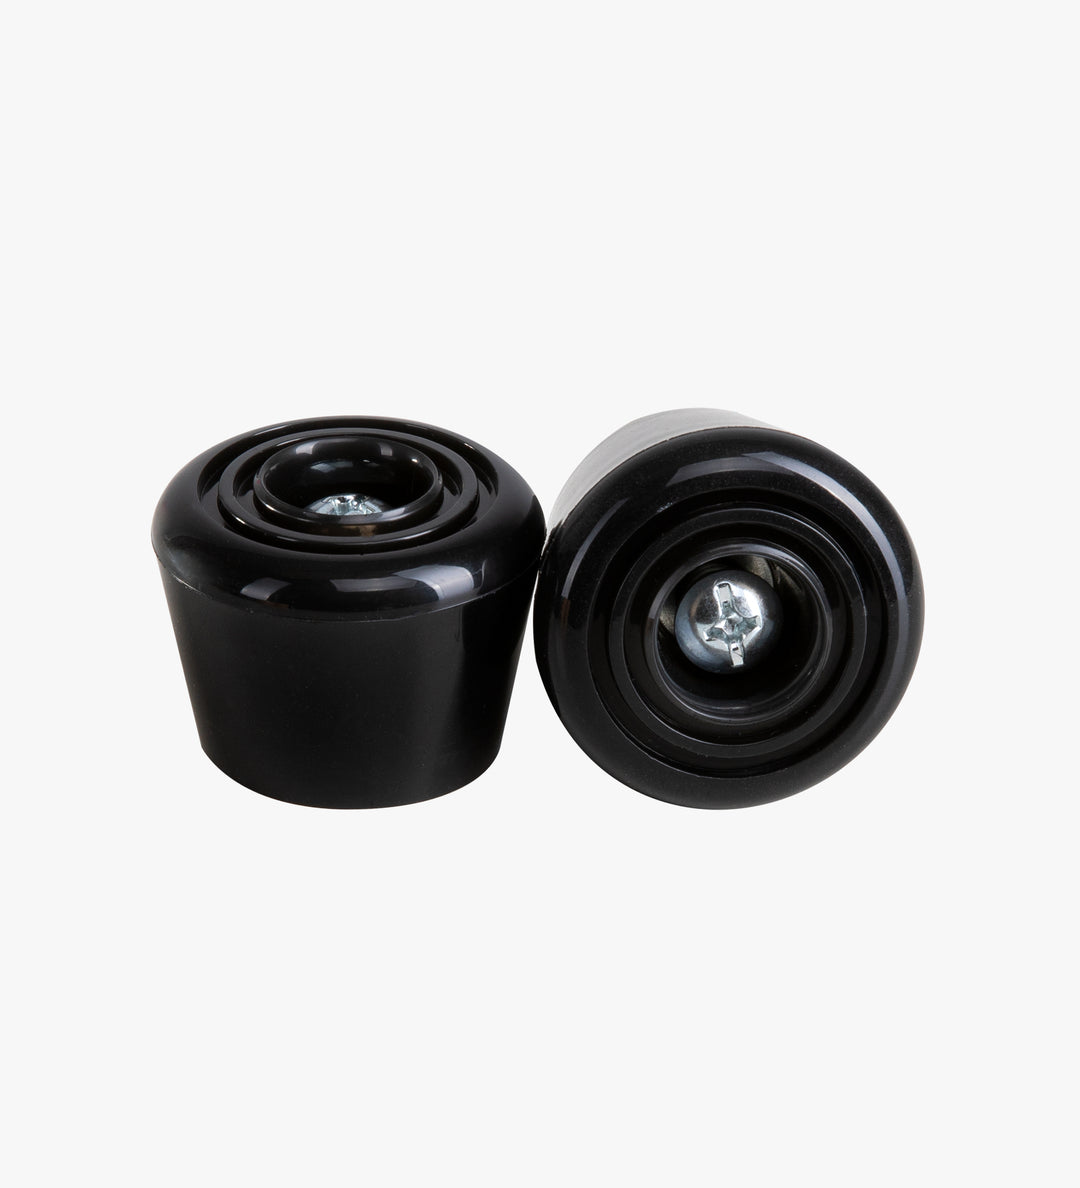 Black C7 roller skate stoppers made from durable polyurethane PU82A dimensions are 47 by 35 mm 